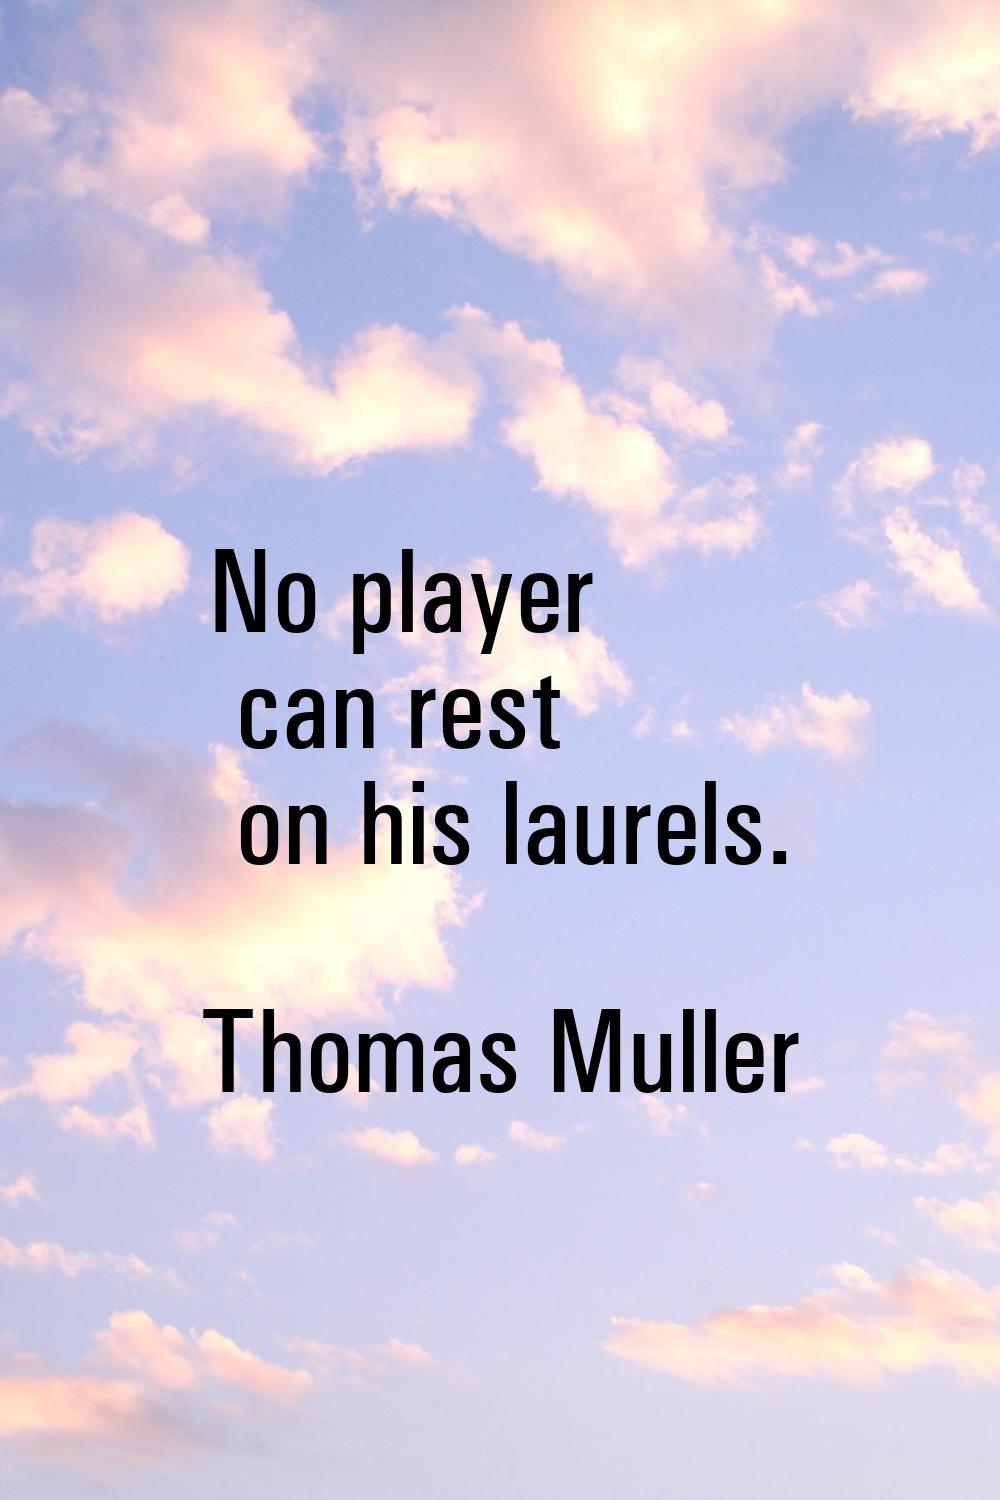 No player can rest on his laurels.